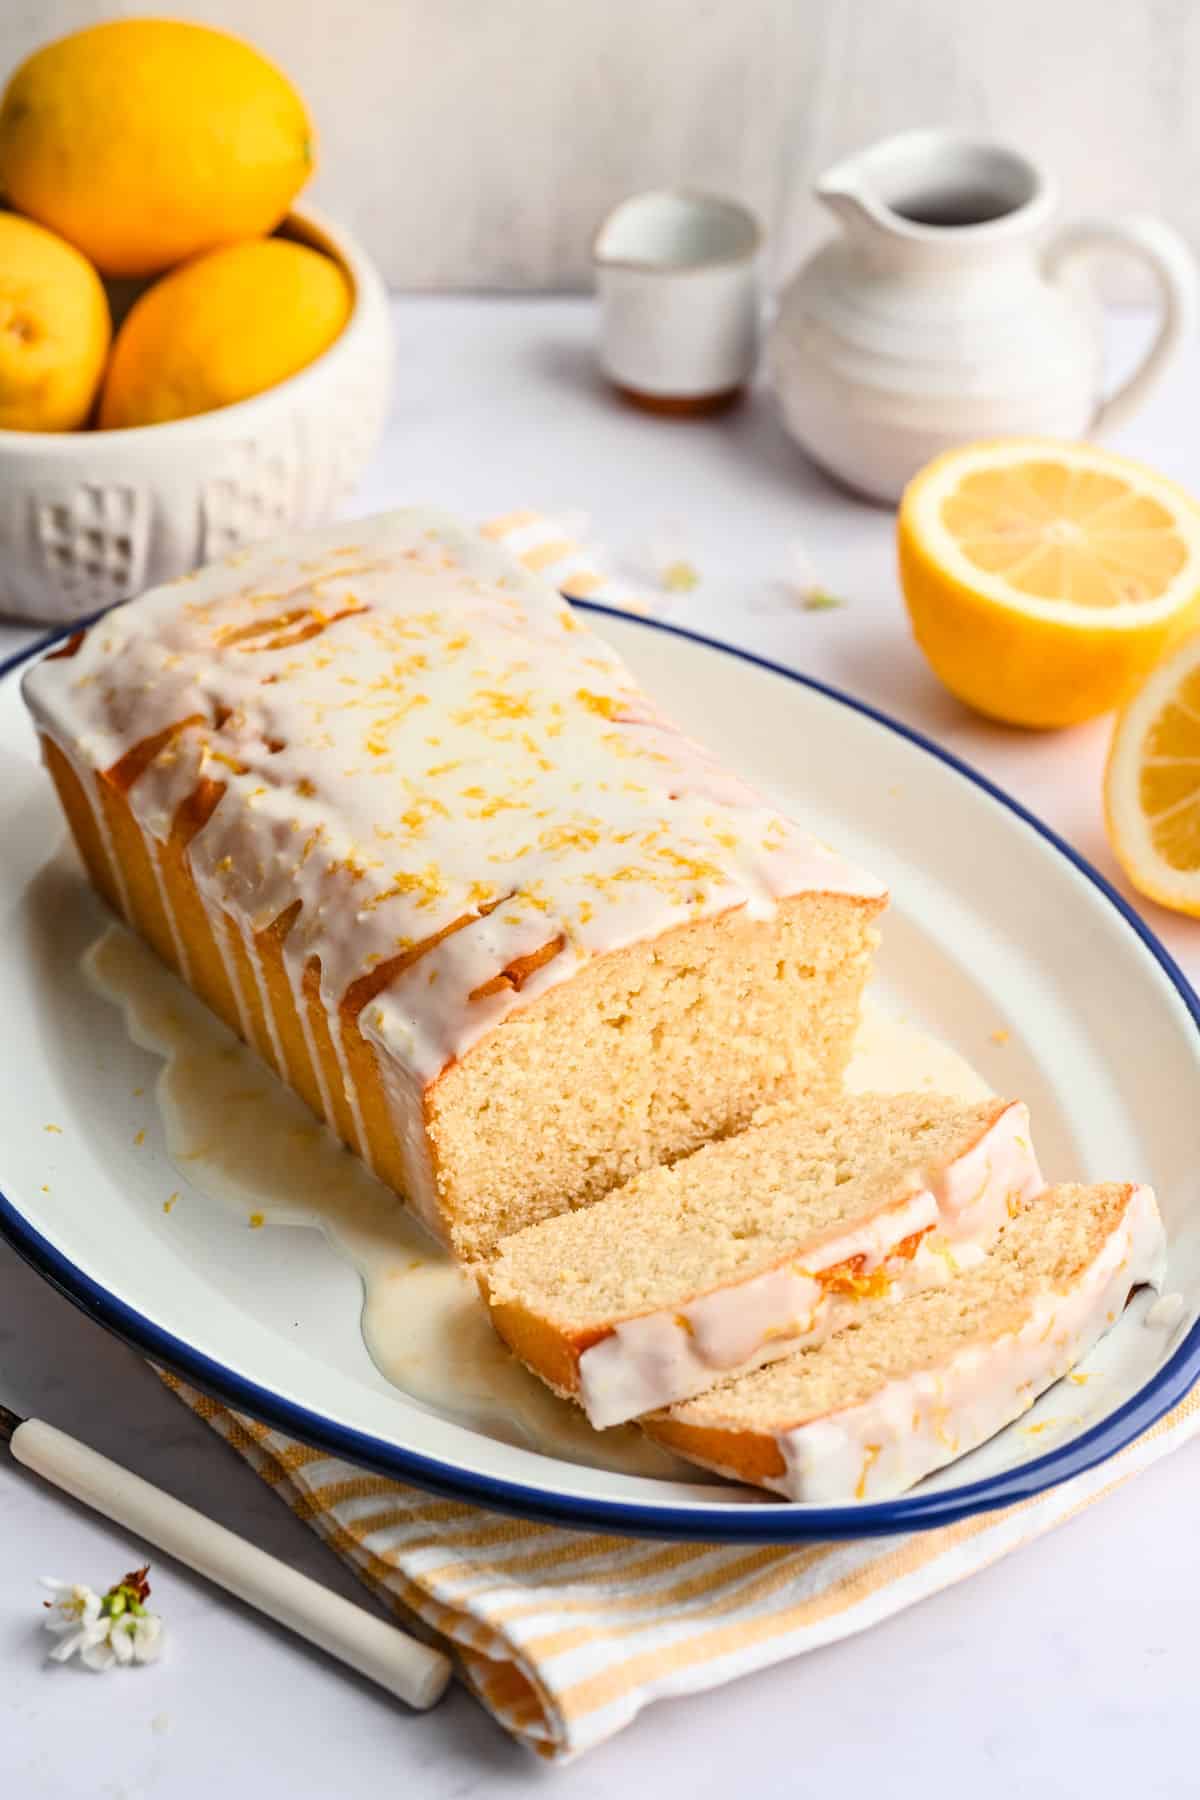 Lemon loaf cake on a plate with two pieces sliced.